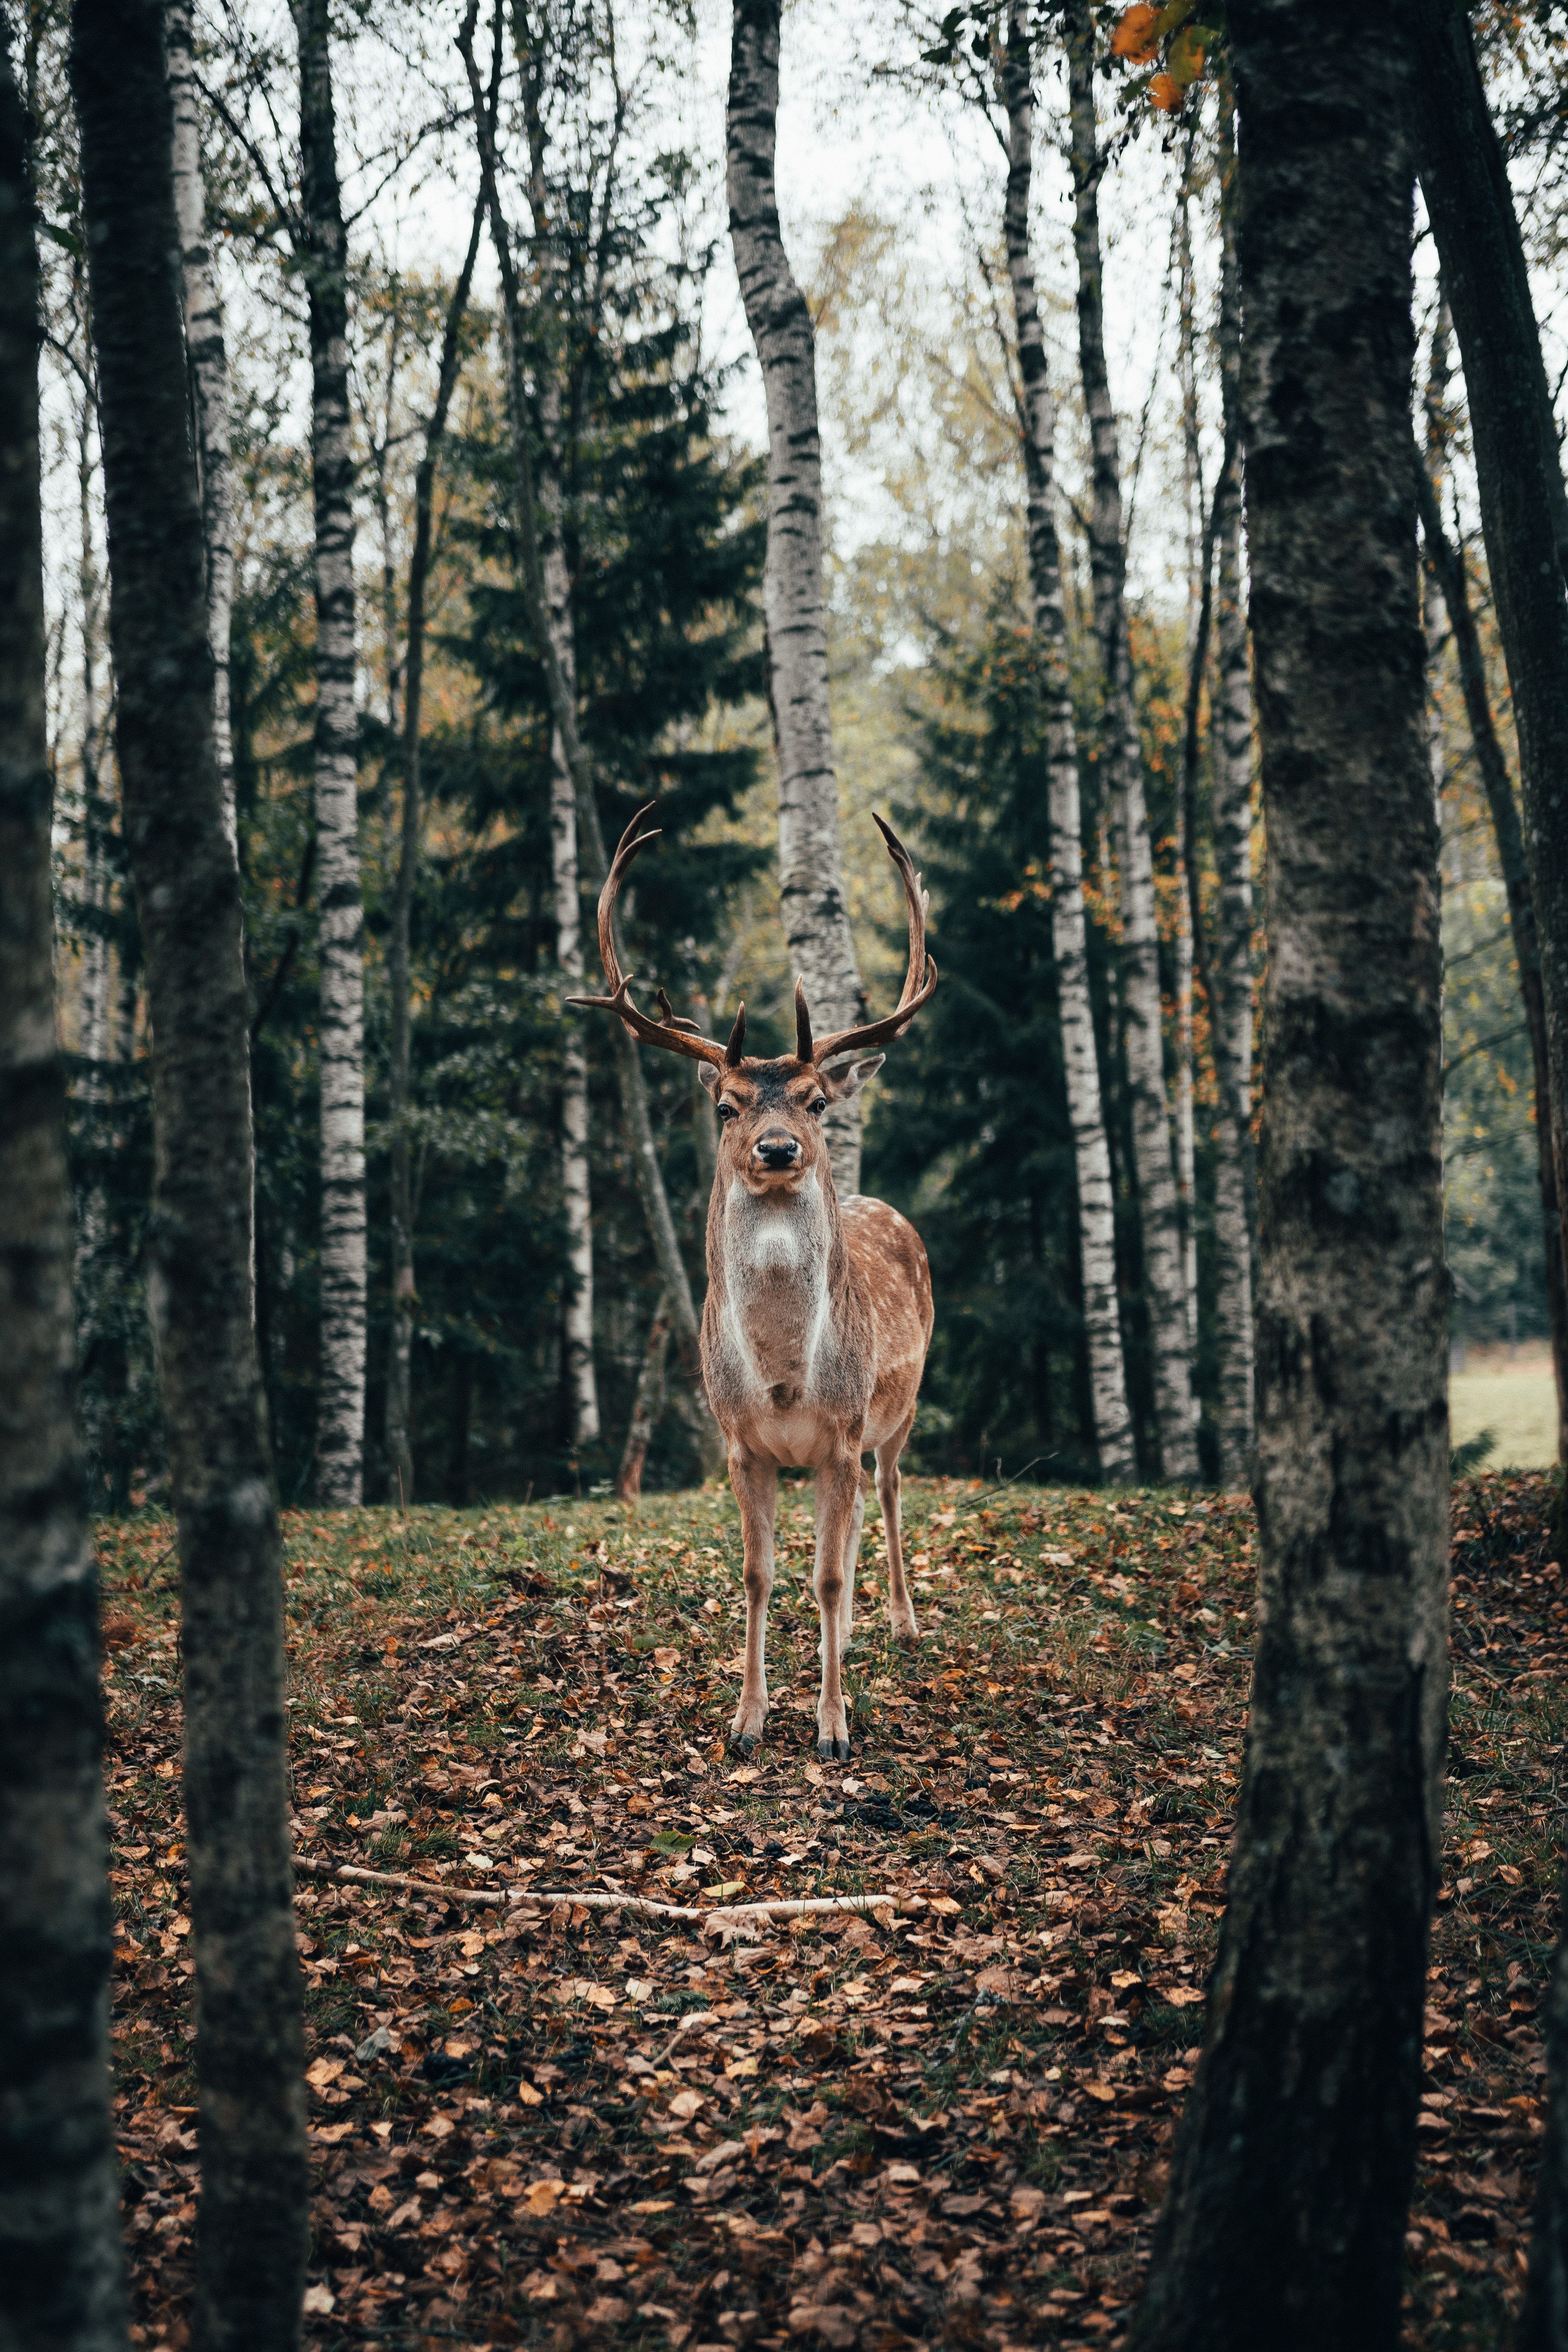 A deer with large antlers stands in the woods. - Deer